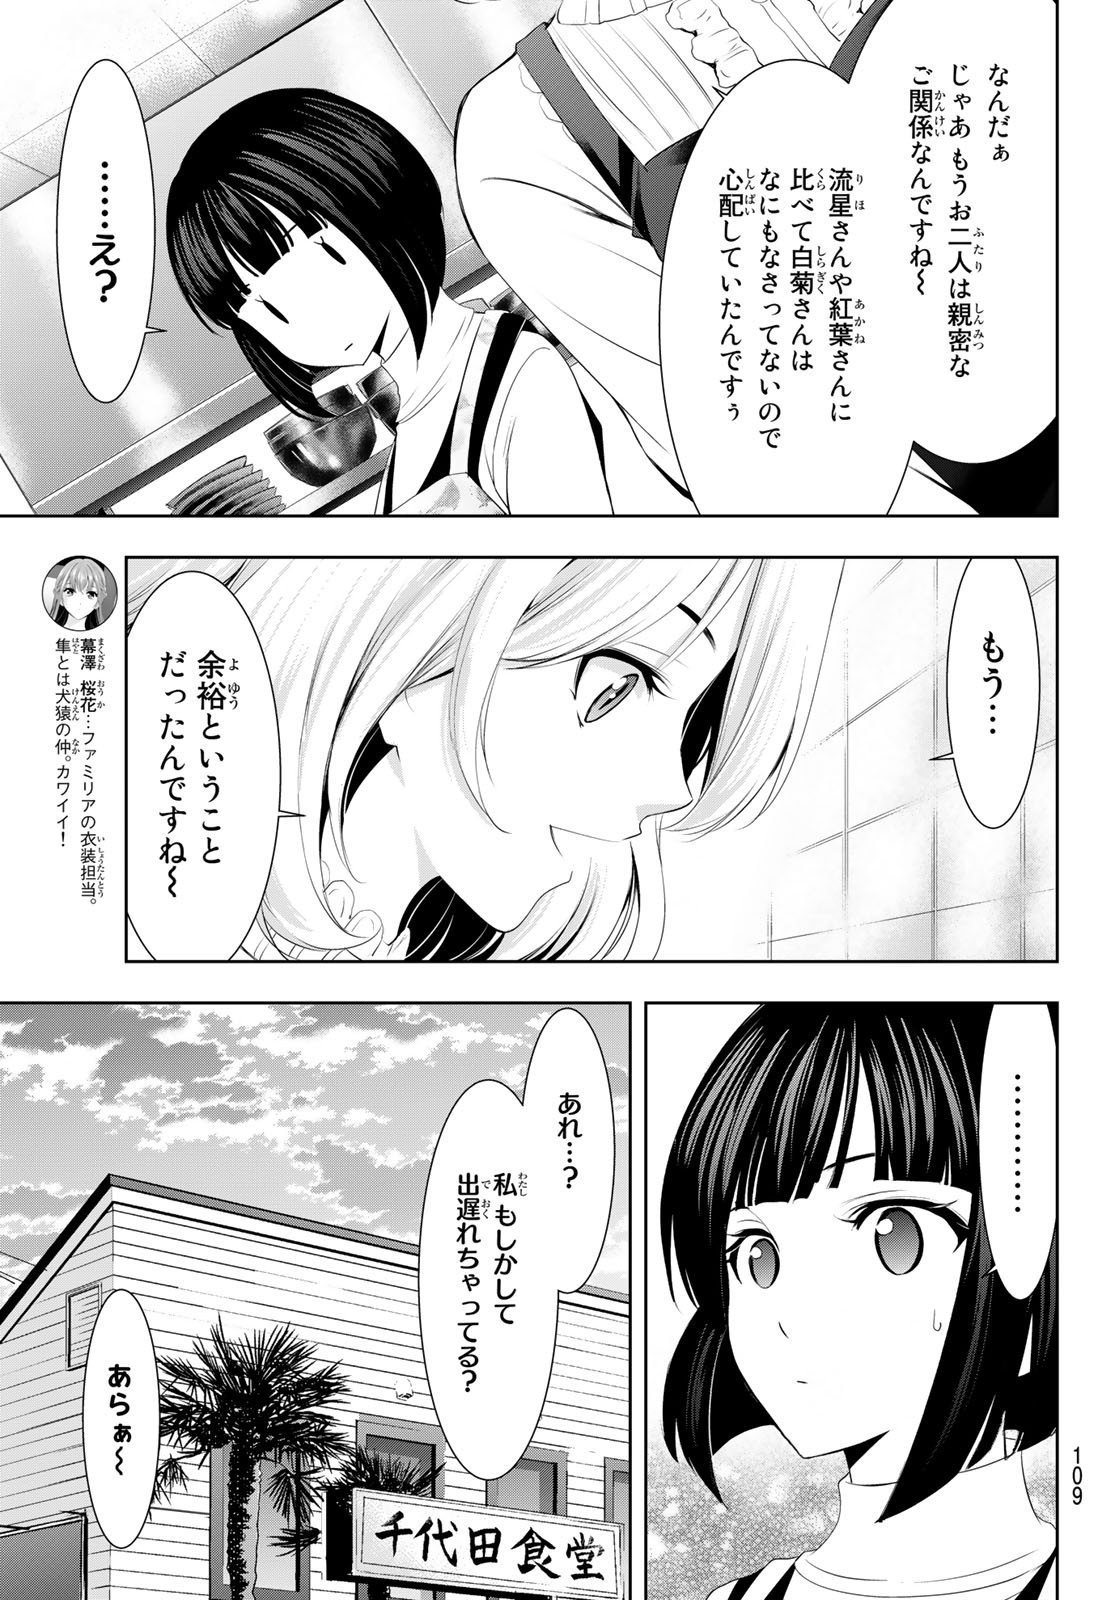 Goddess-Cafe-Terrace - Chapter 076 - Page 13